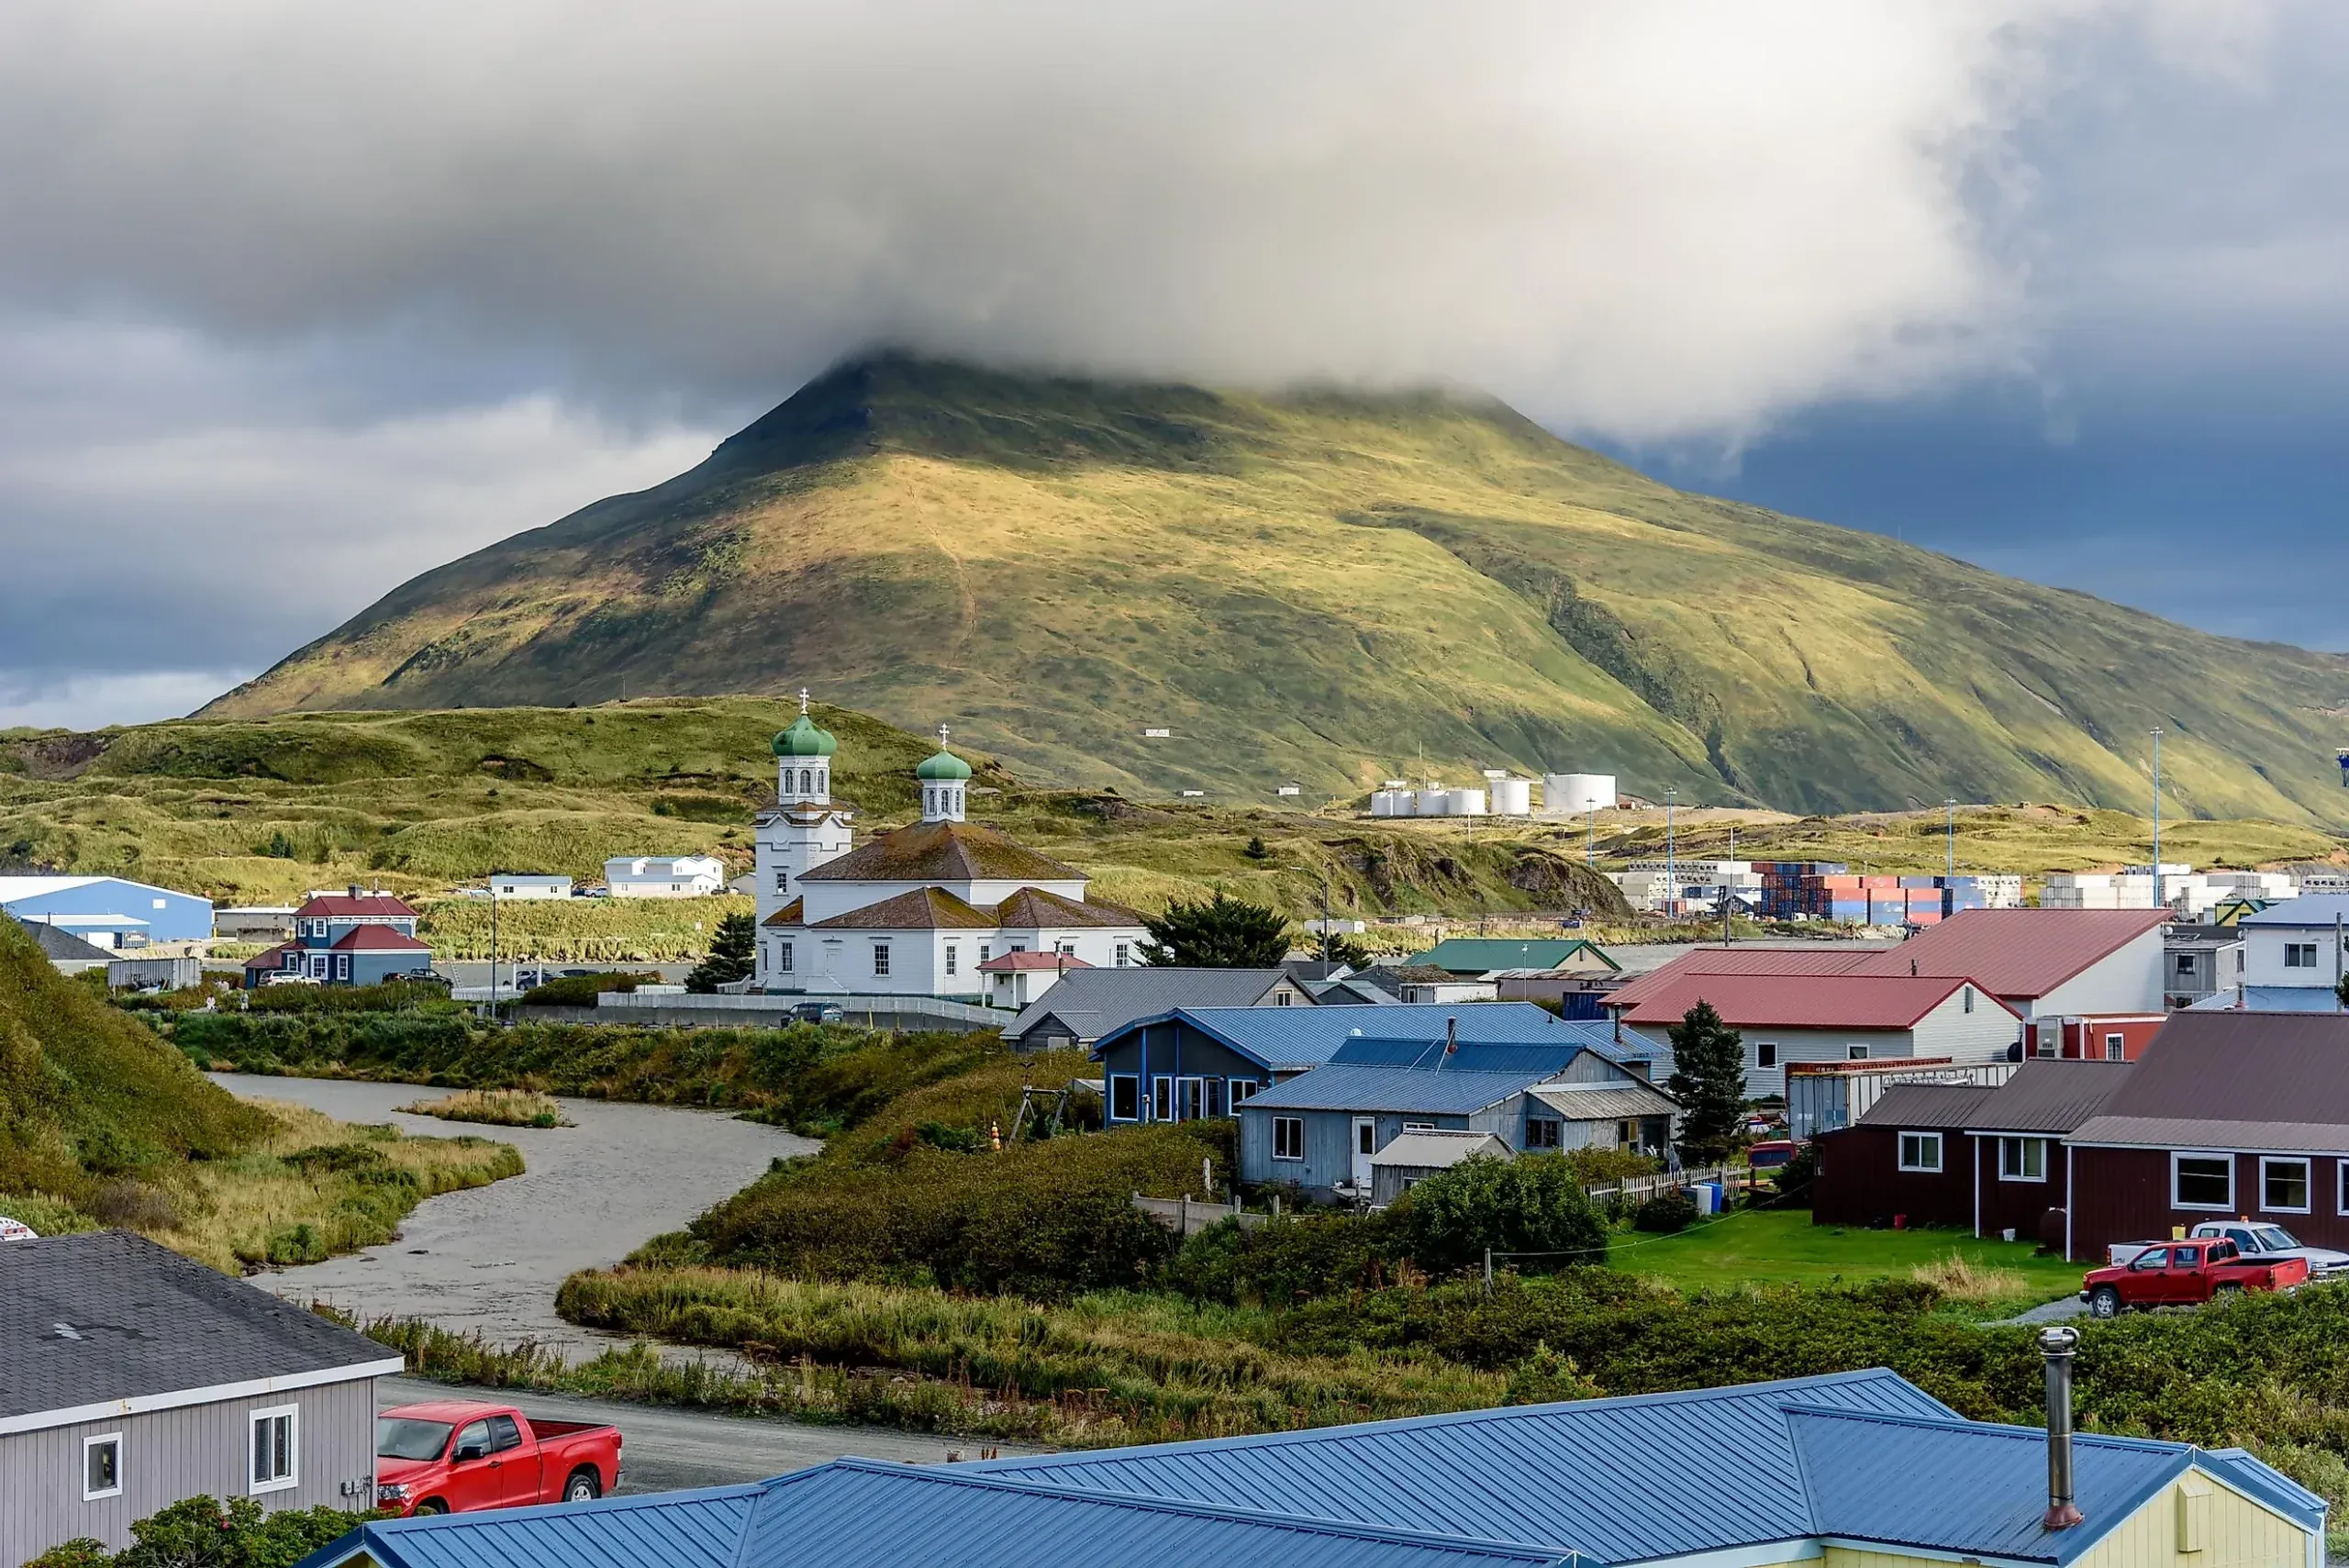 Unalaska, located in the Aleutian Islands of Alaska, has been dubbed the "ugliest town in the state"